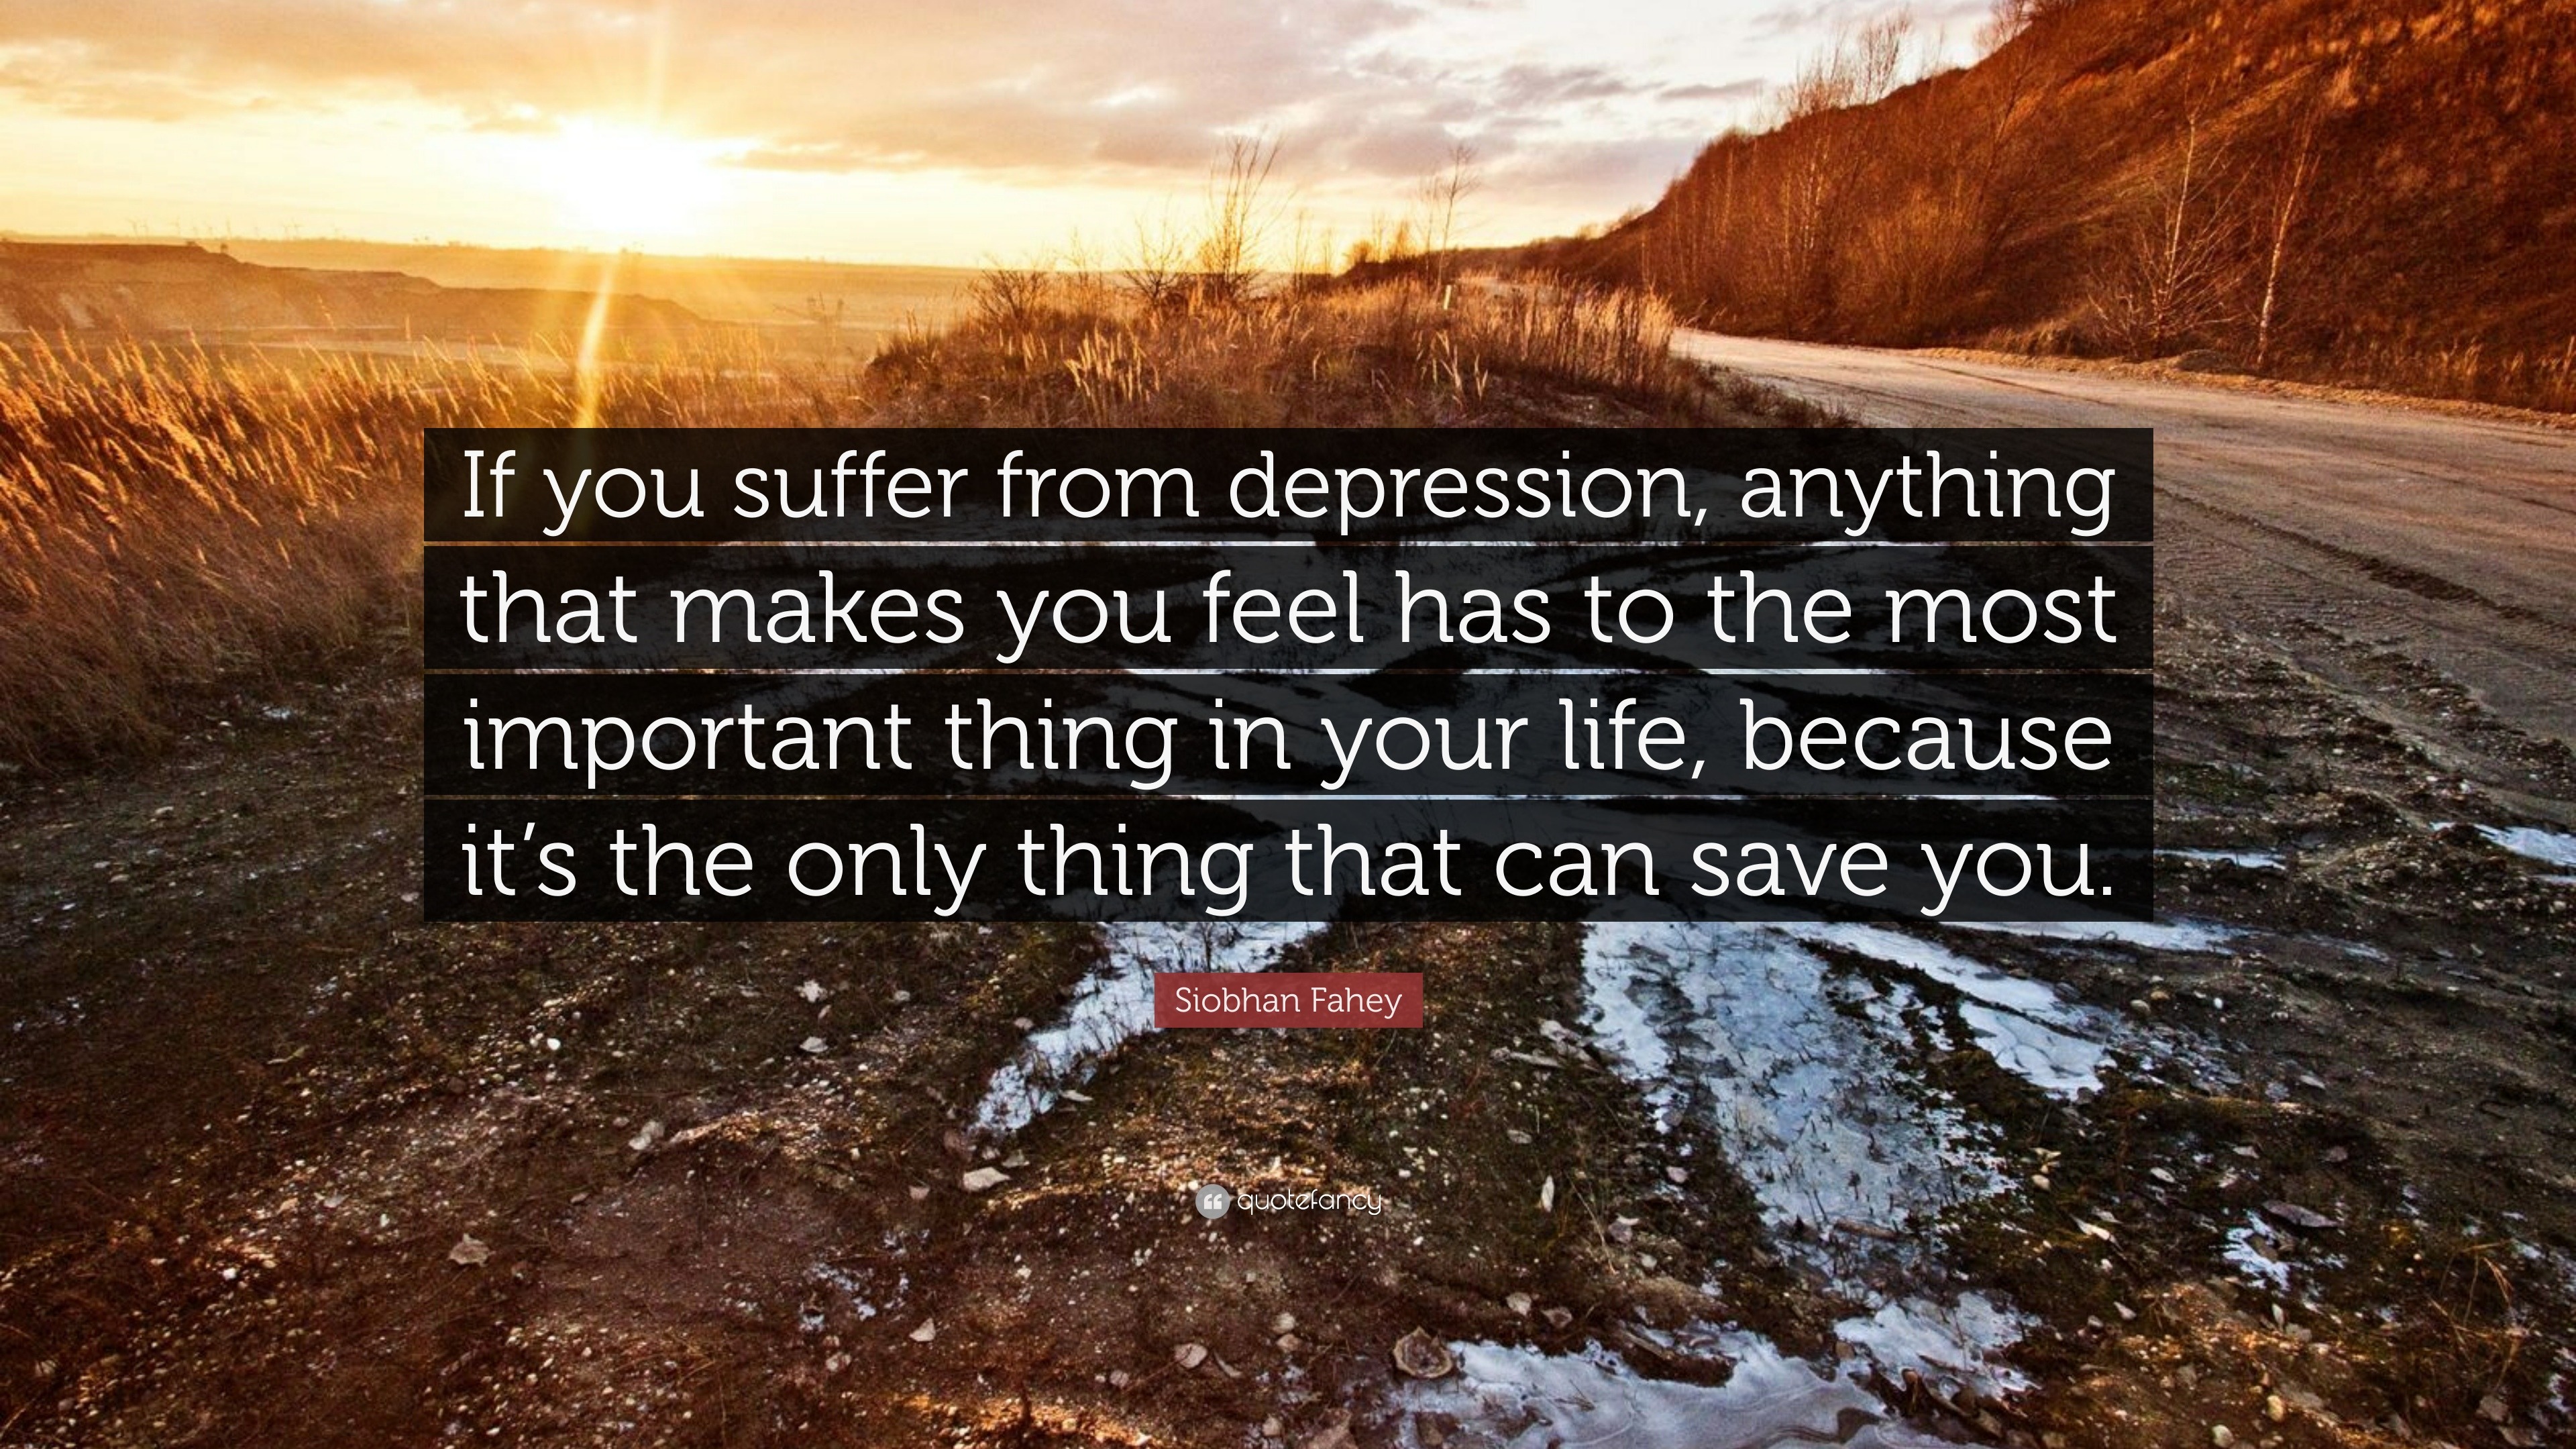 Siobhan Fahey Quote If You Suffer From Depression Anything That Makes You Feel Has To The Most Important Thing In Your Life Because It S T